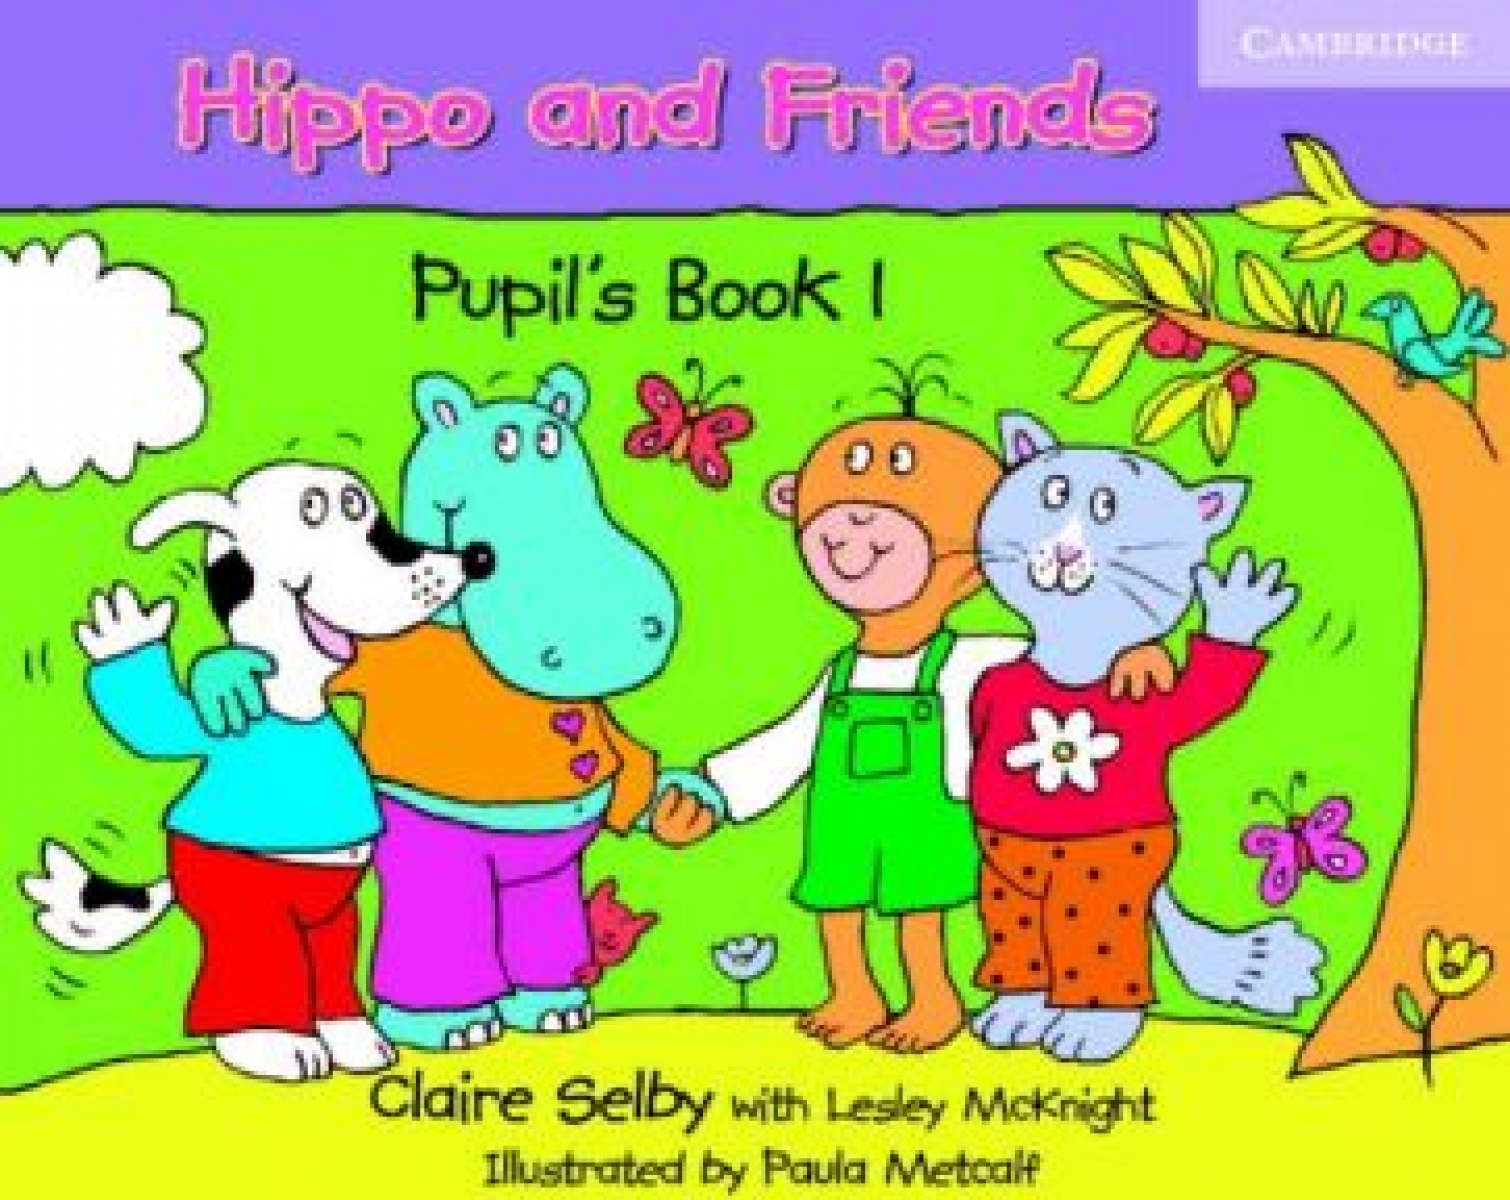 Claire Selby, Lesley McKnight Hippo and Friends 1 Pupil's Book 